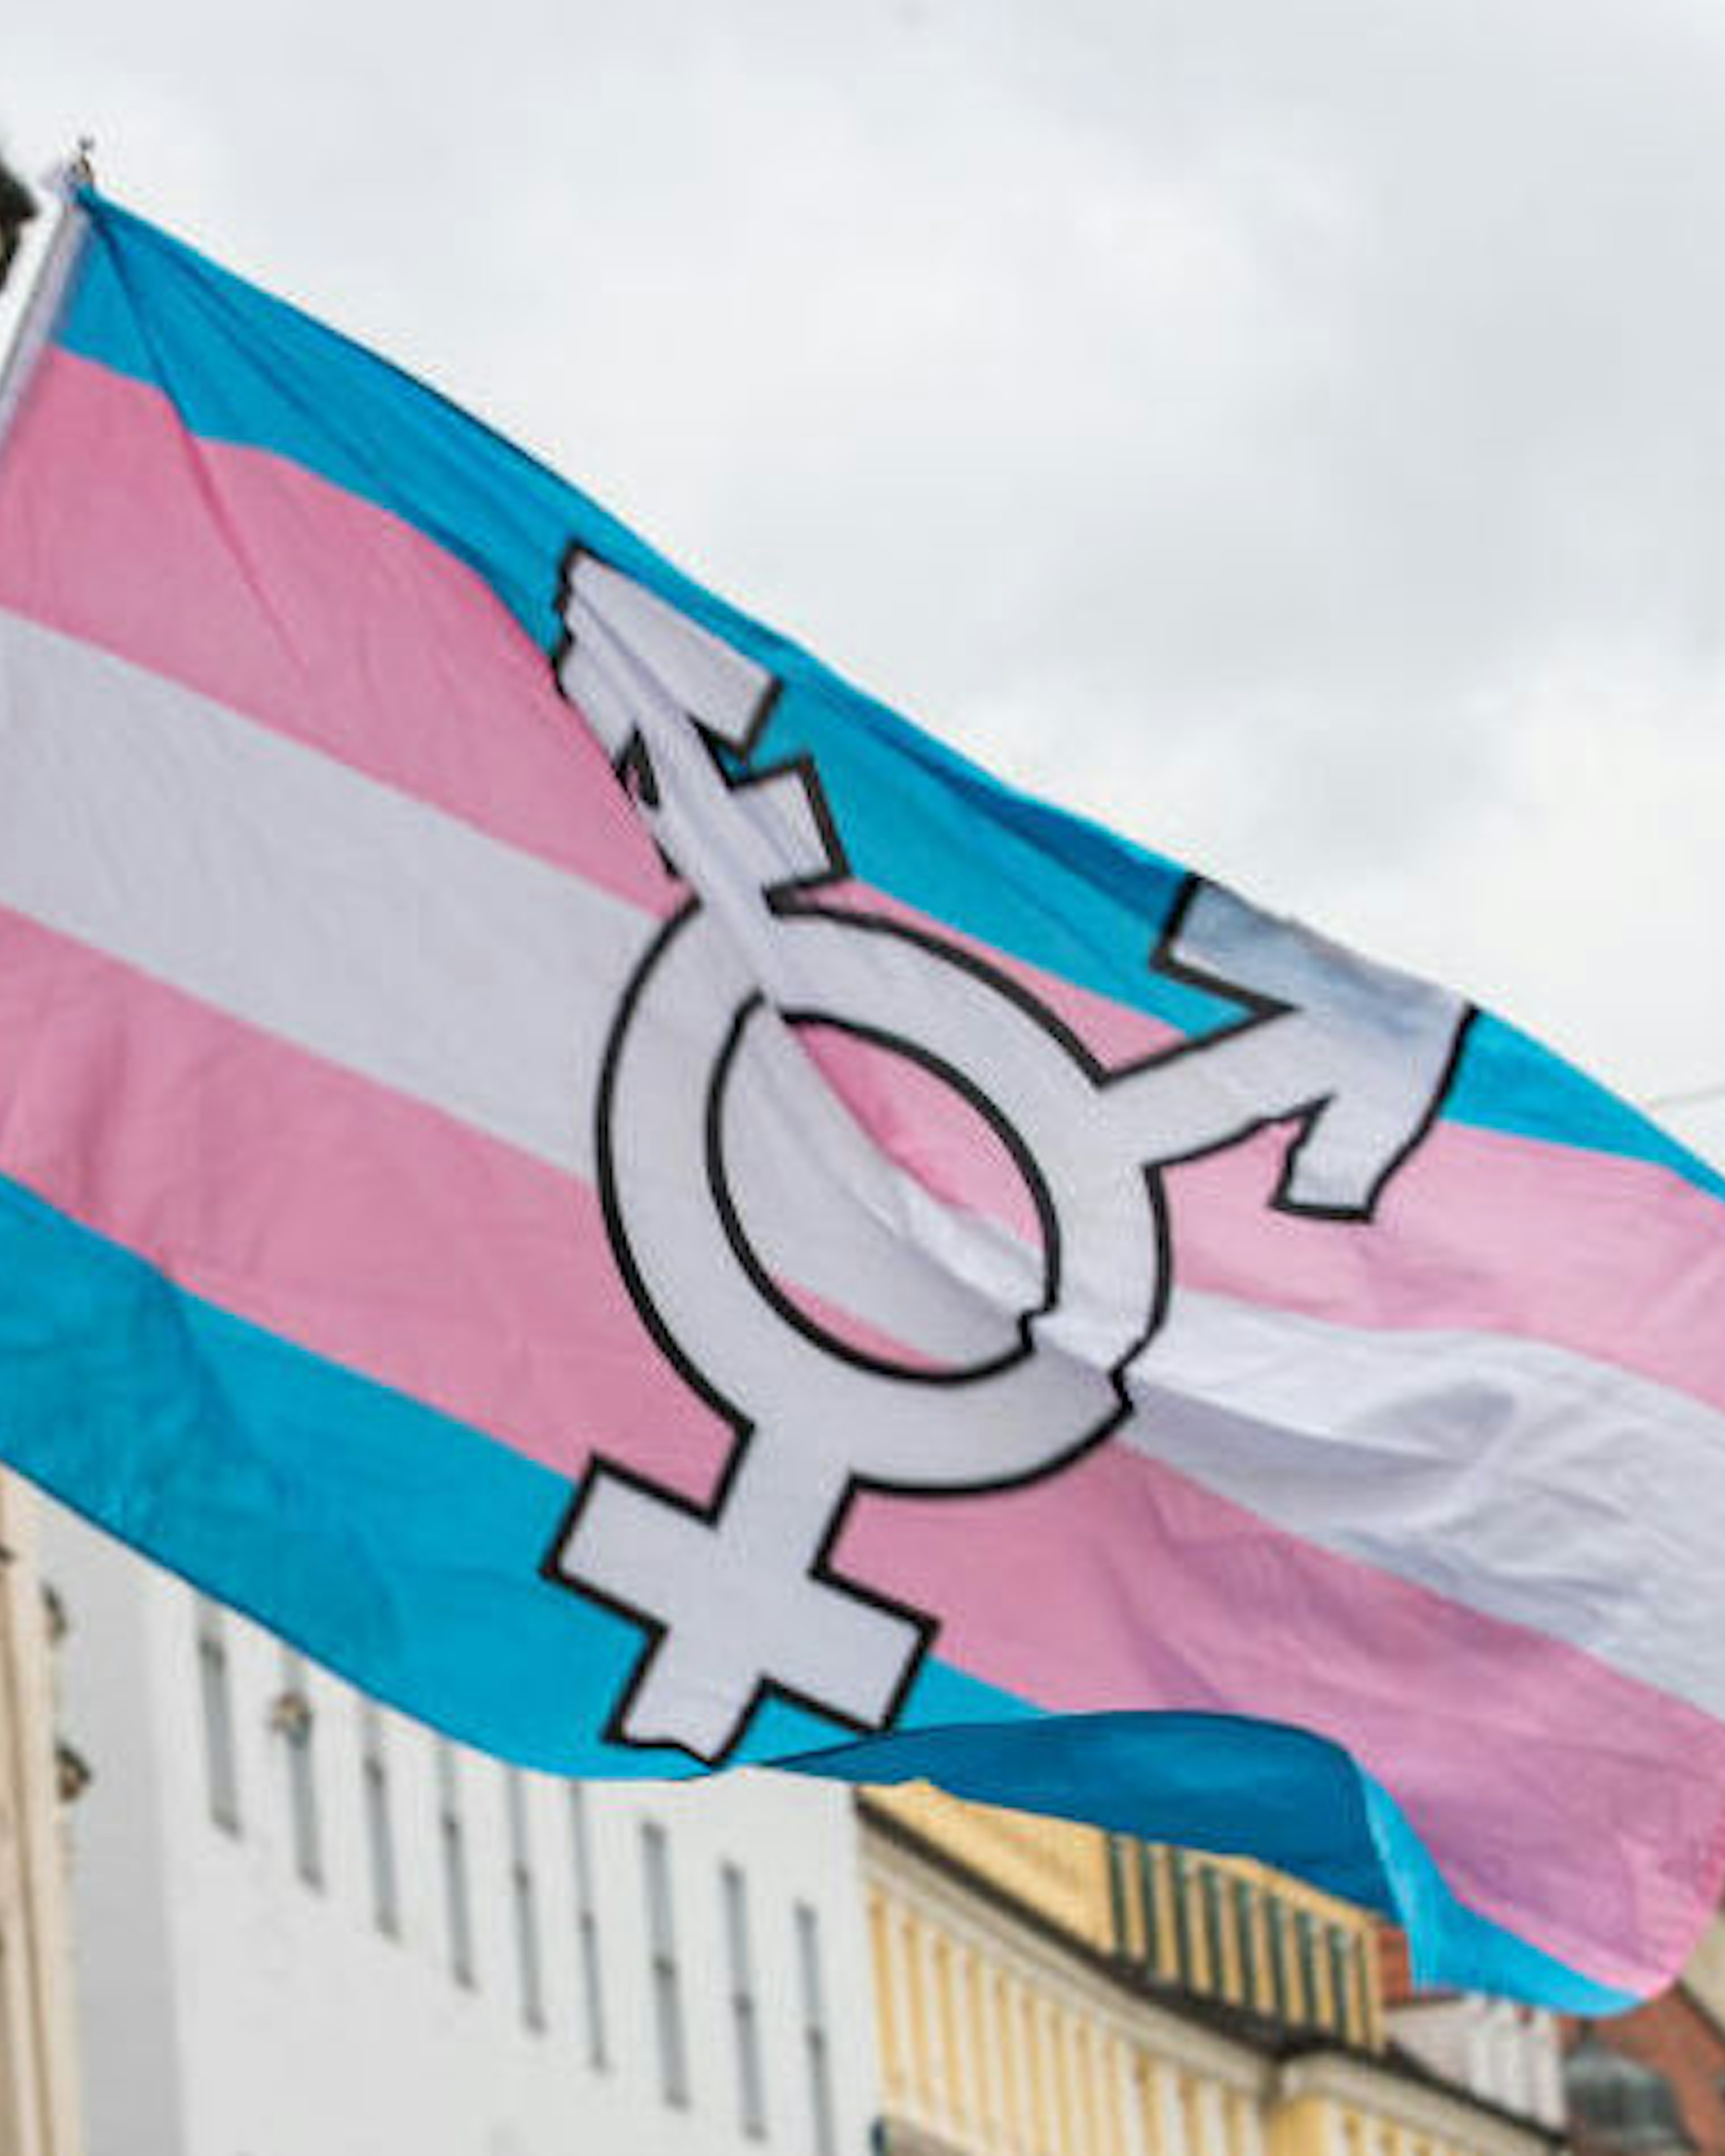 Trans Flag. On 13.7.2019 Hundreds of Thousands celebrated the Pride ( Christopher Street Day ) in Munich. Several LGBTQ Groups participated. (Photo by Alexander Pohl/NurPhoto)